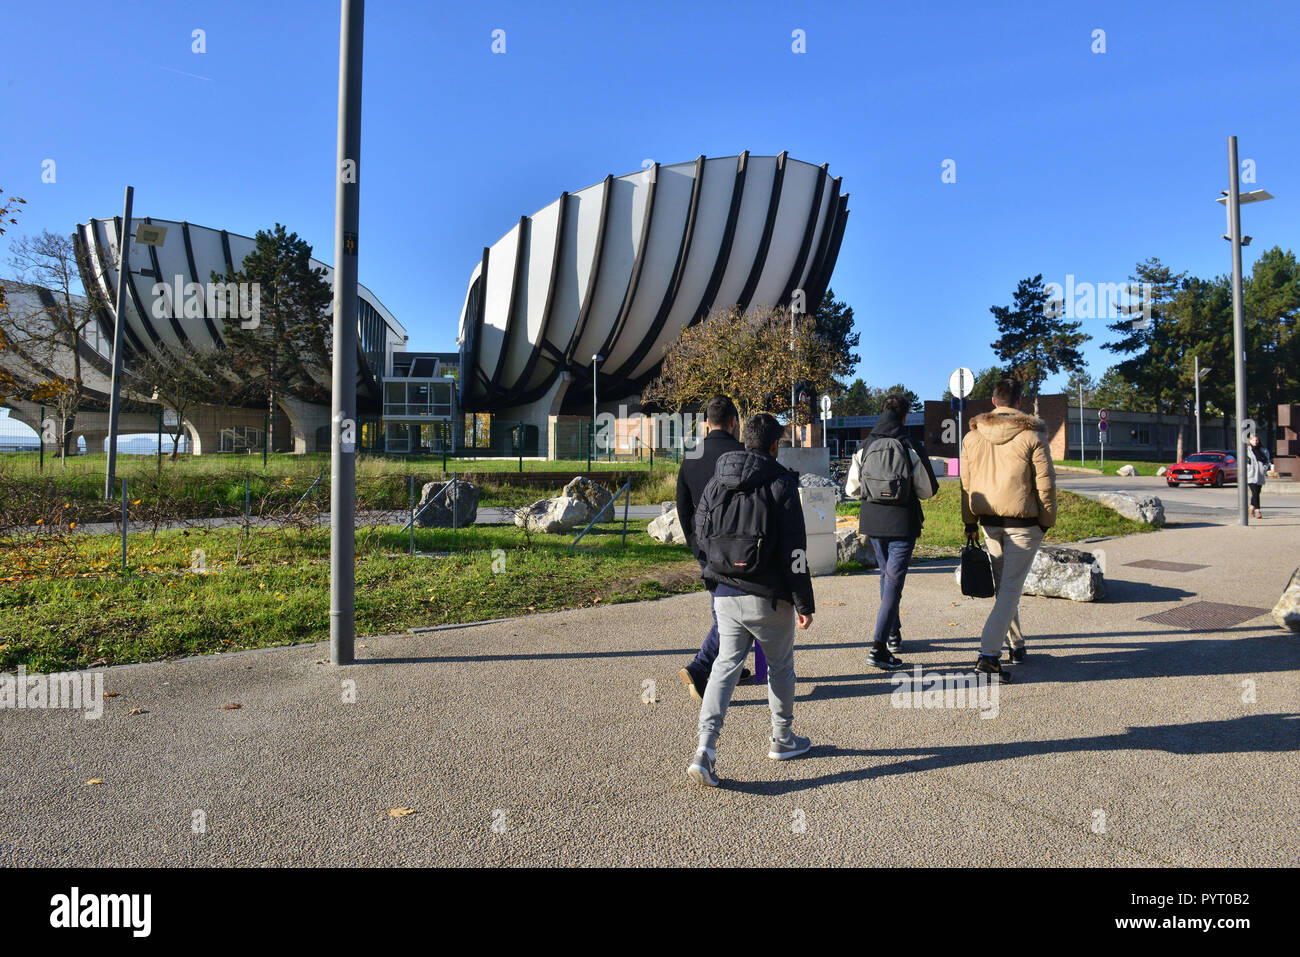 Reims (north-eastern France): Reims Champagne-Ardennes University, Arts and Social Sciences department Stock Photo